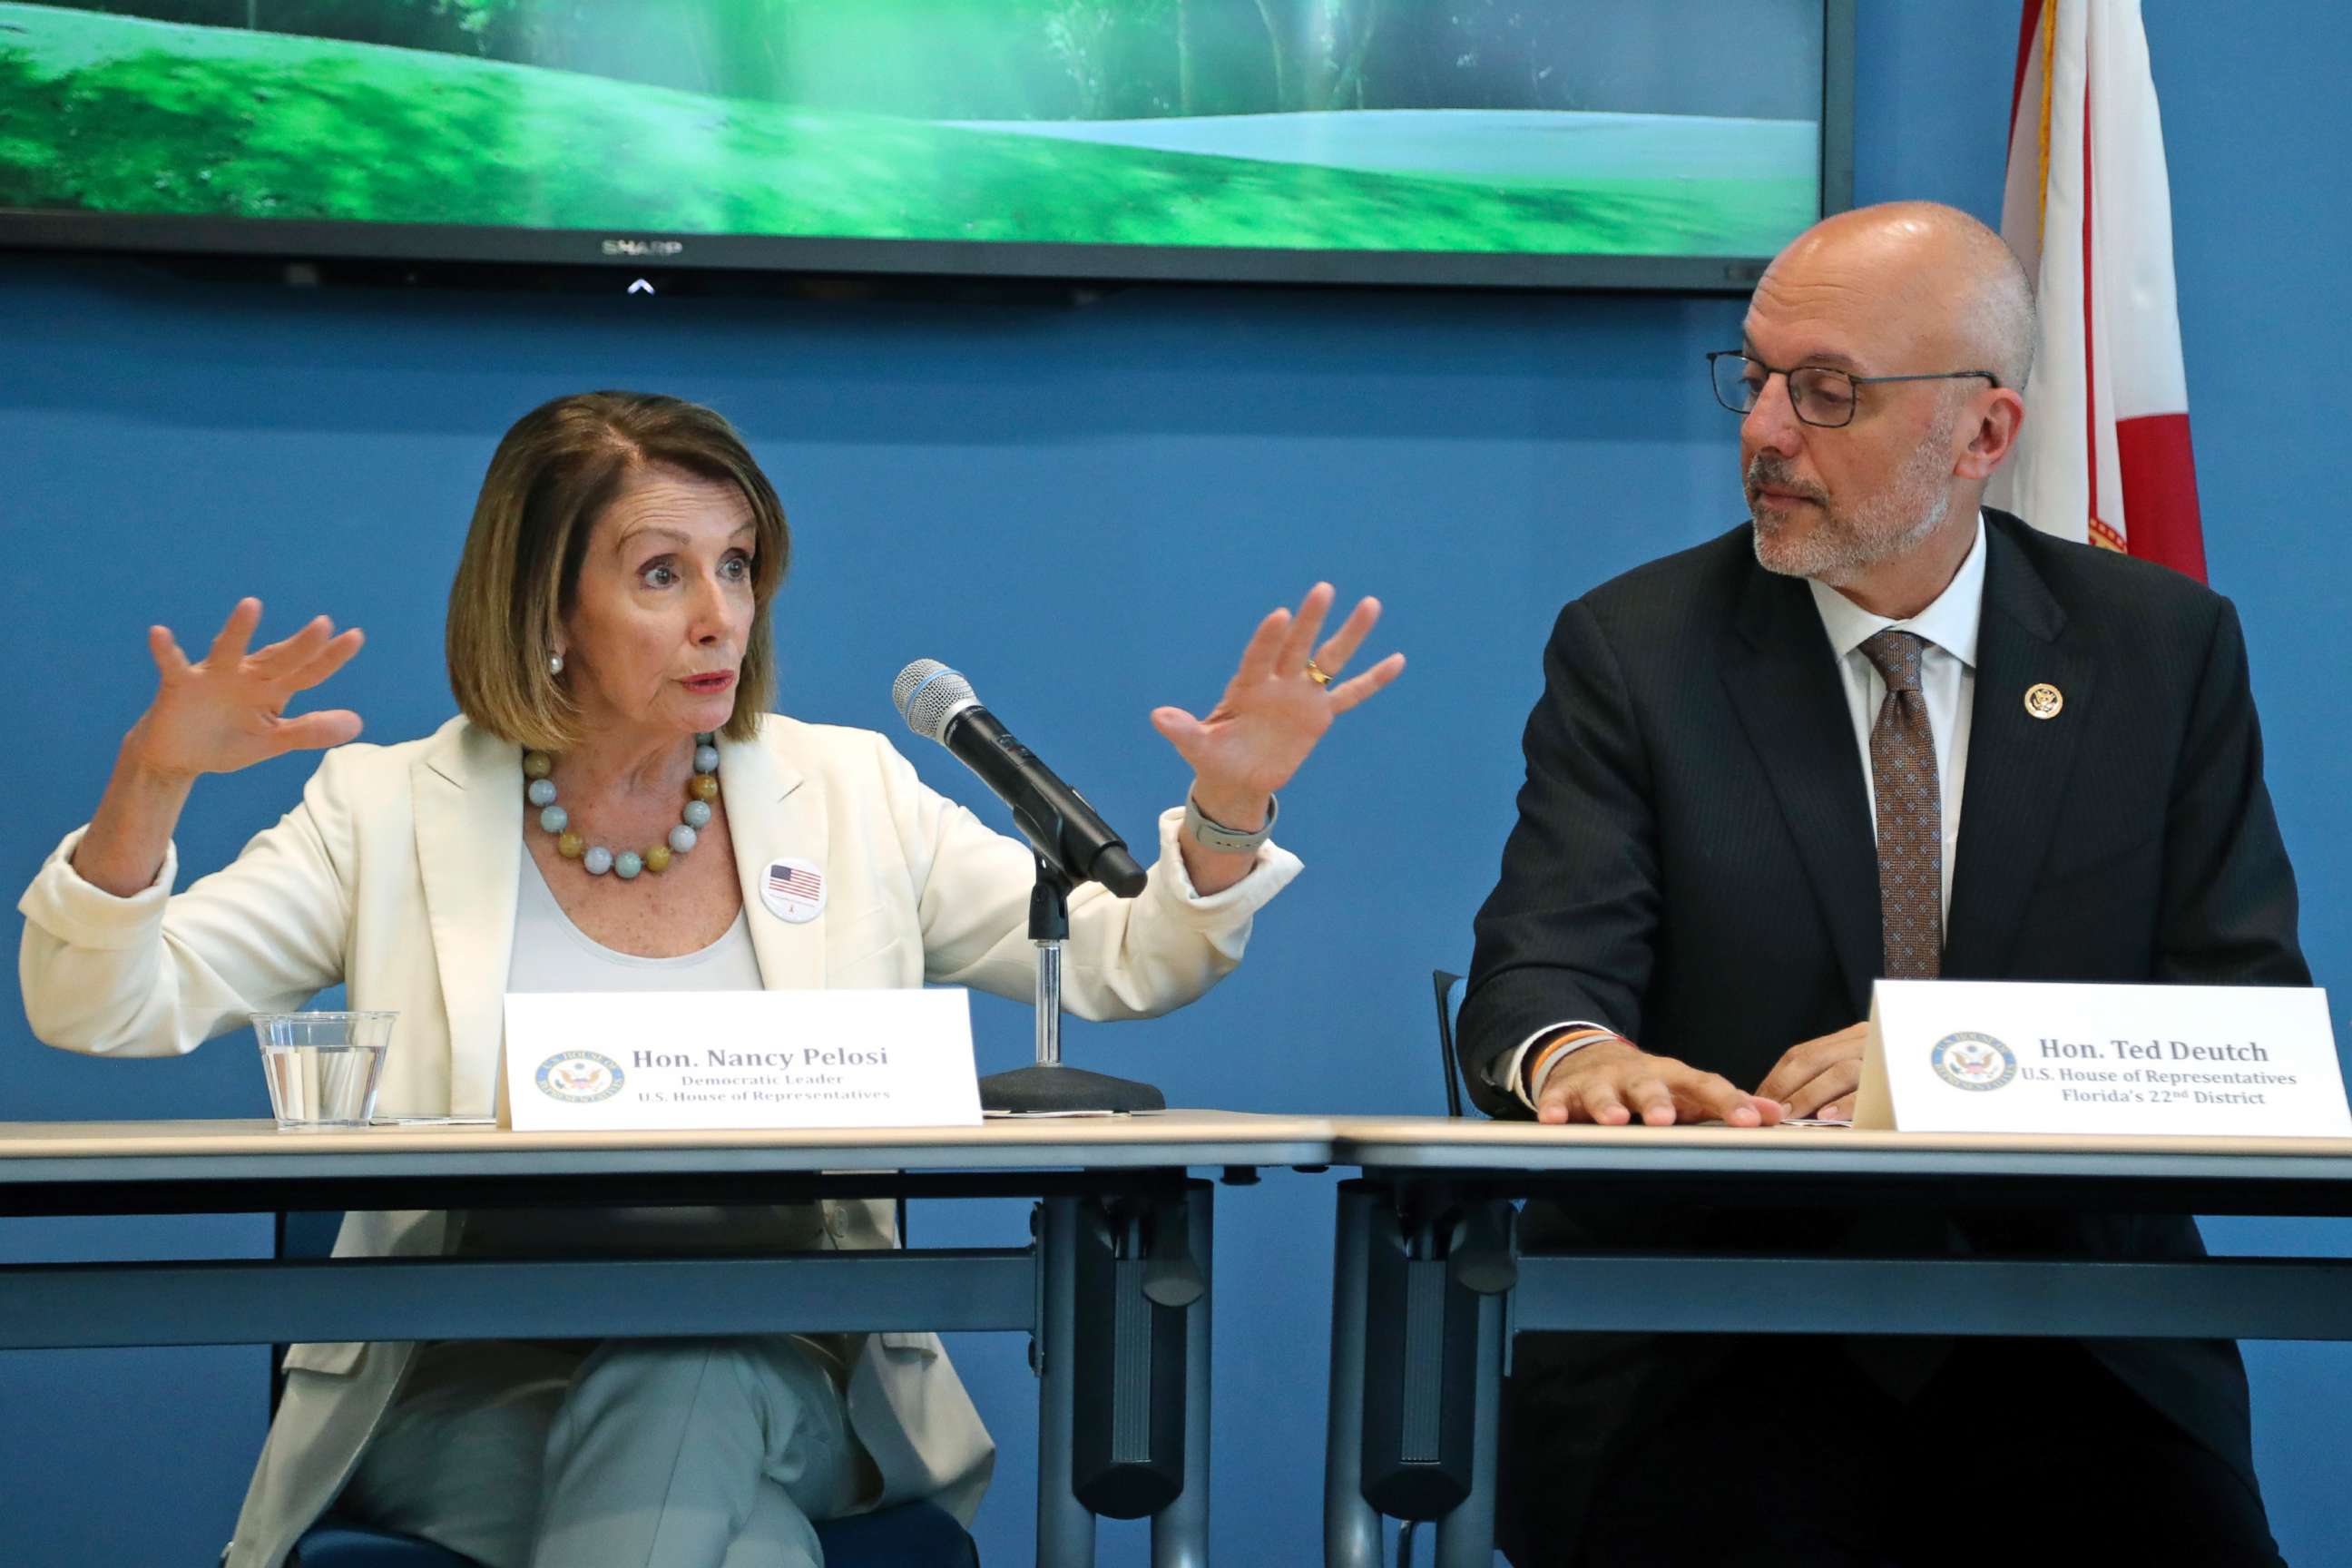 PHOTO: Rep. Ted Deutch looks on as House Minority Leader Nancy Pelosi speaks during a roundtable on gun violence at Coral Springs City Hall, Oct. 17, 2018, in Coral Springs, Fla.